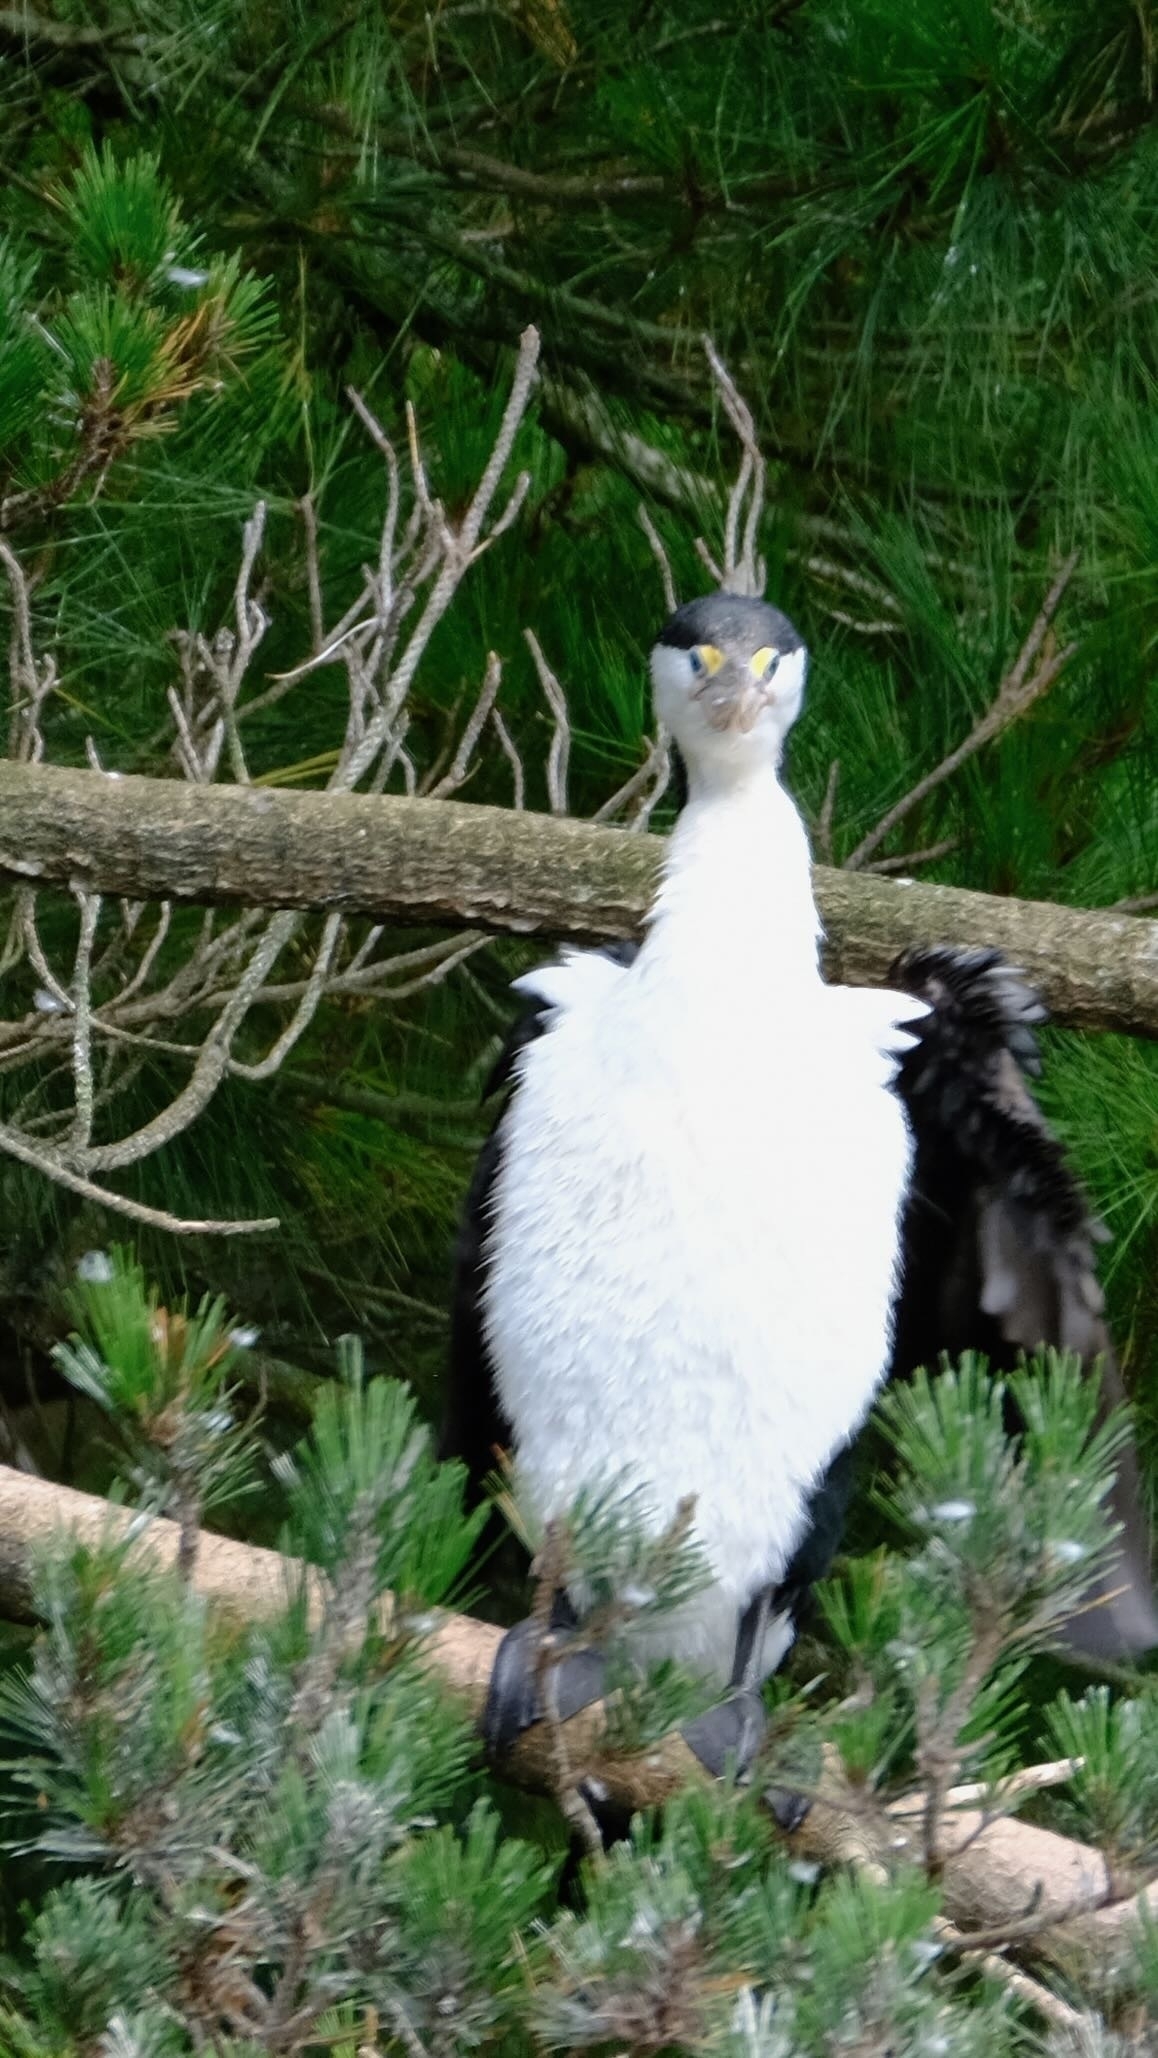 Shag in a tree looking straight at the camera with googly eyes. 